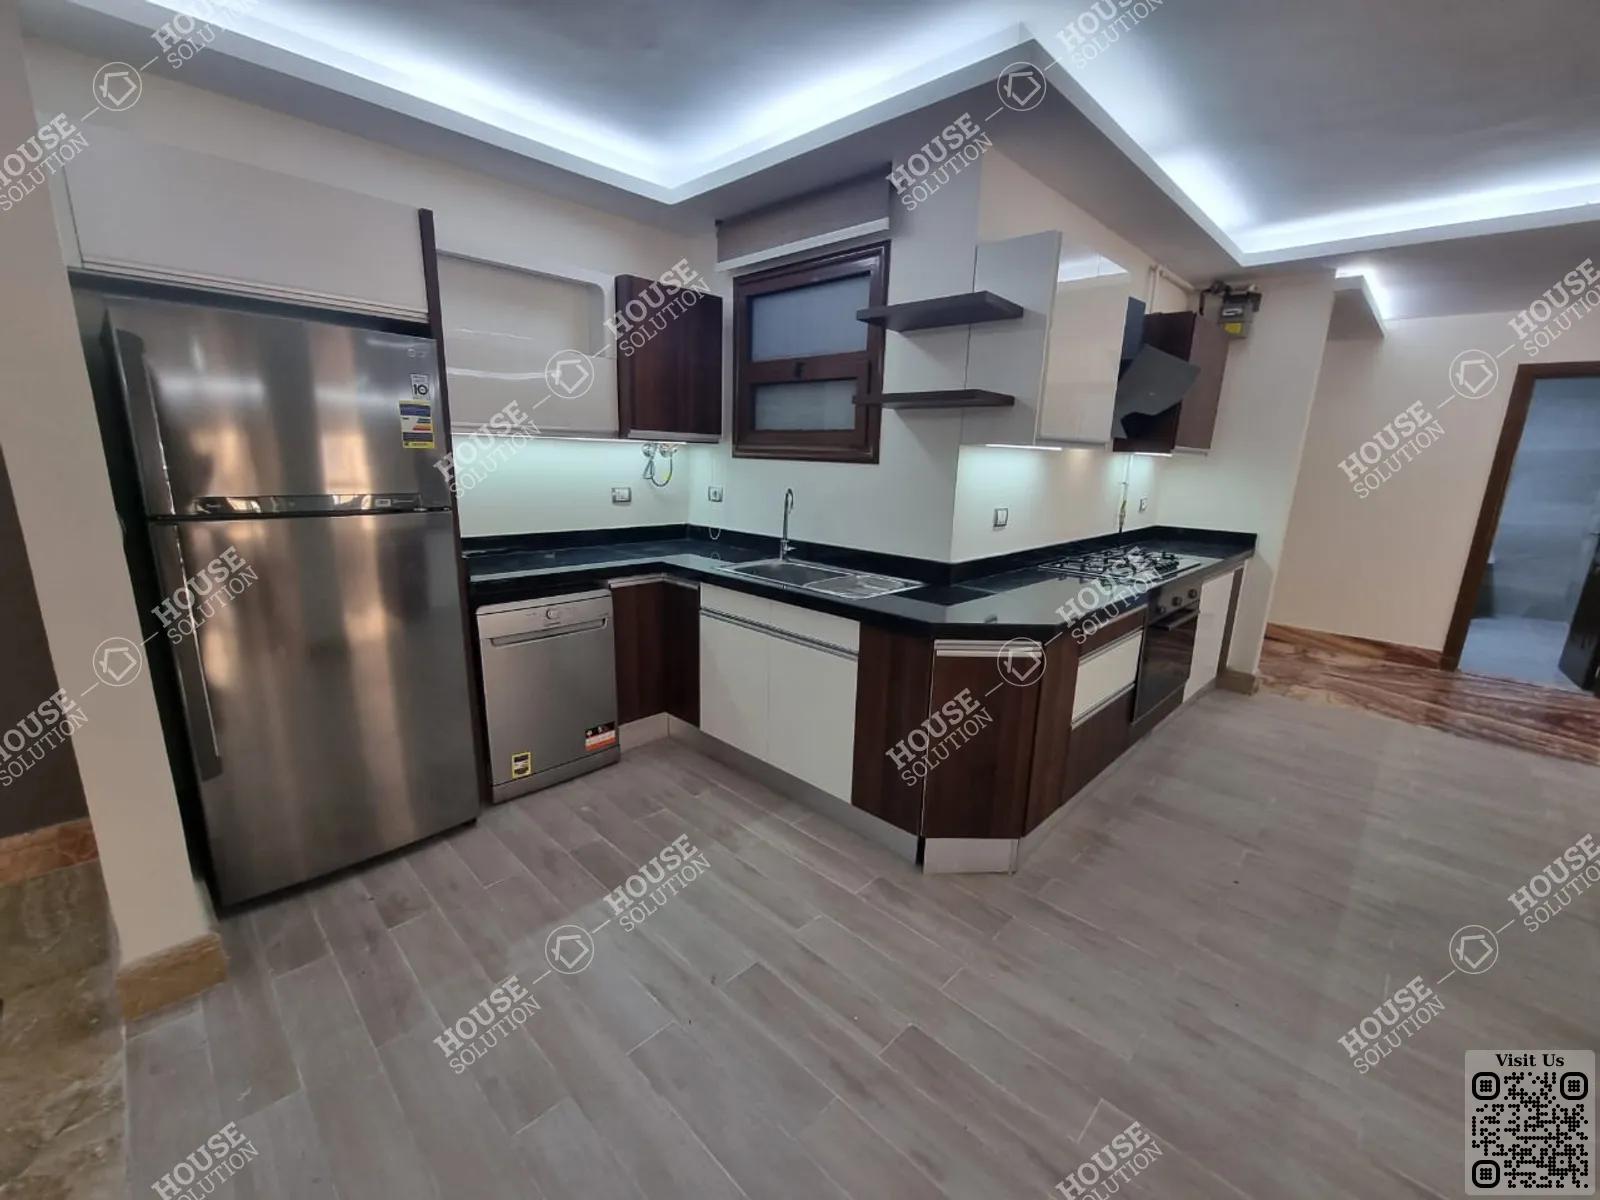 KITCHEN  @ Apartments For Rent In Maadi Maadi Sarayat Area: 320 m² consists of 3 Bedrooms 5 Bathrooms Modern furnished 5 stars #5671-2